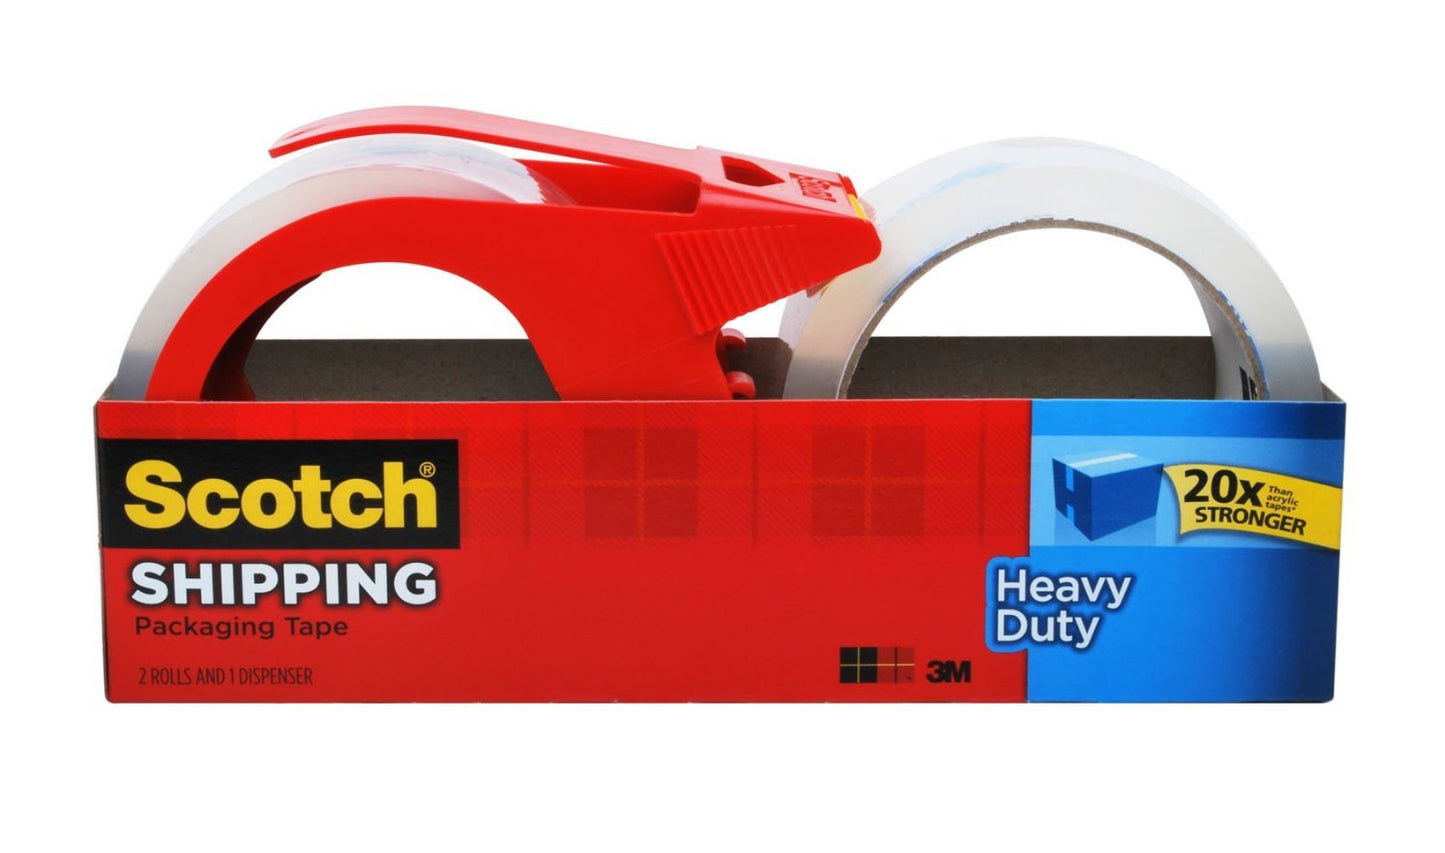 Scotch Heavy Duty Shipping Packaging Tape 2-Pack 1.88-in x 163.8-ft Clear Packing Tape (3850-21RD)